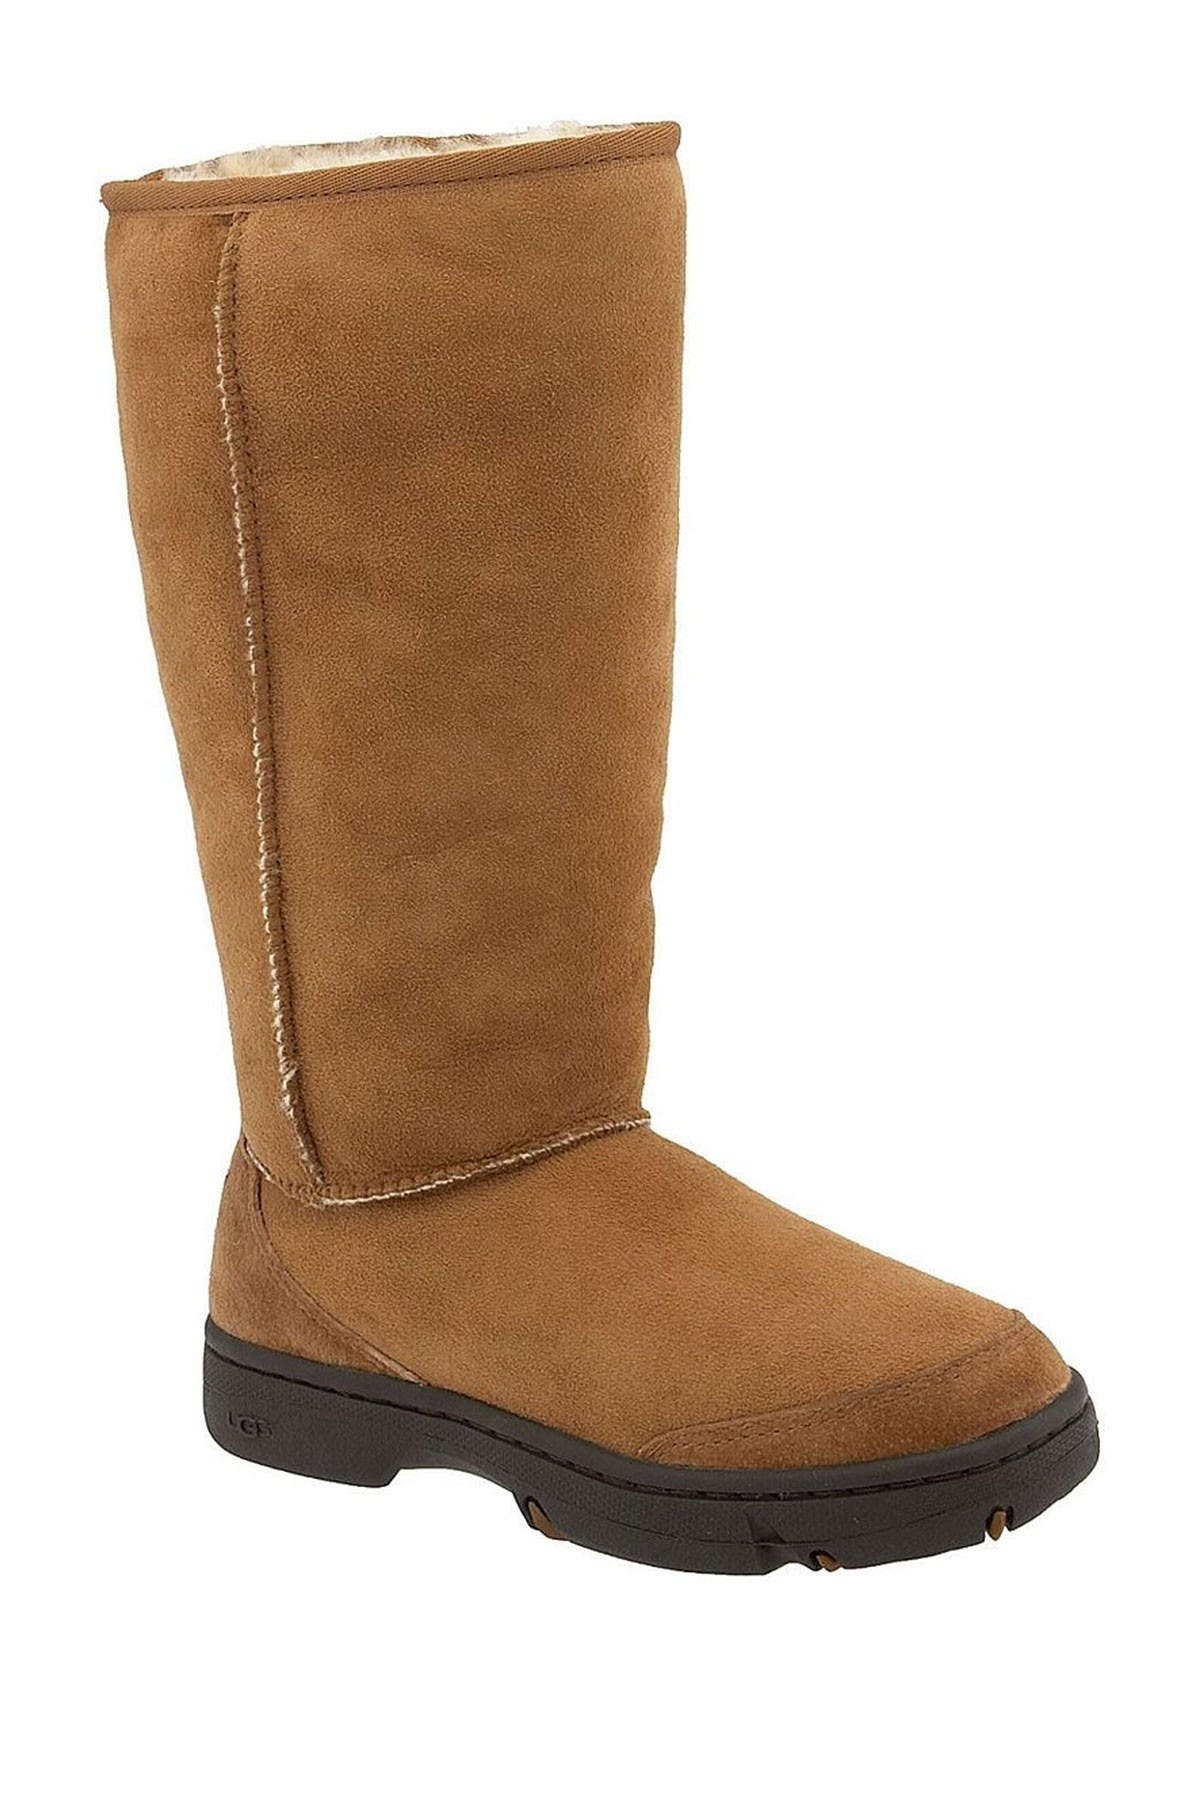 ultimate tall ugg boots